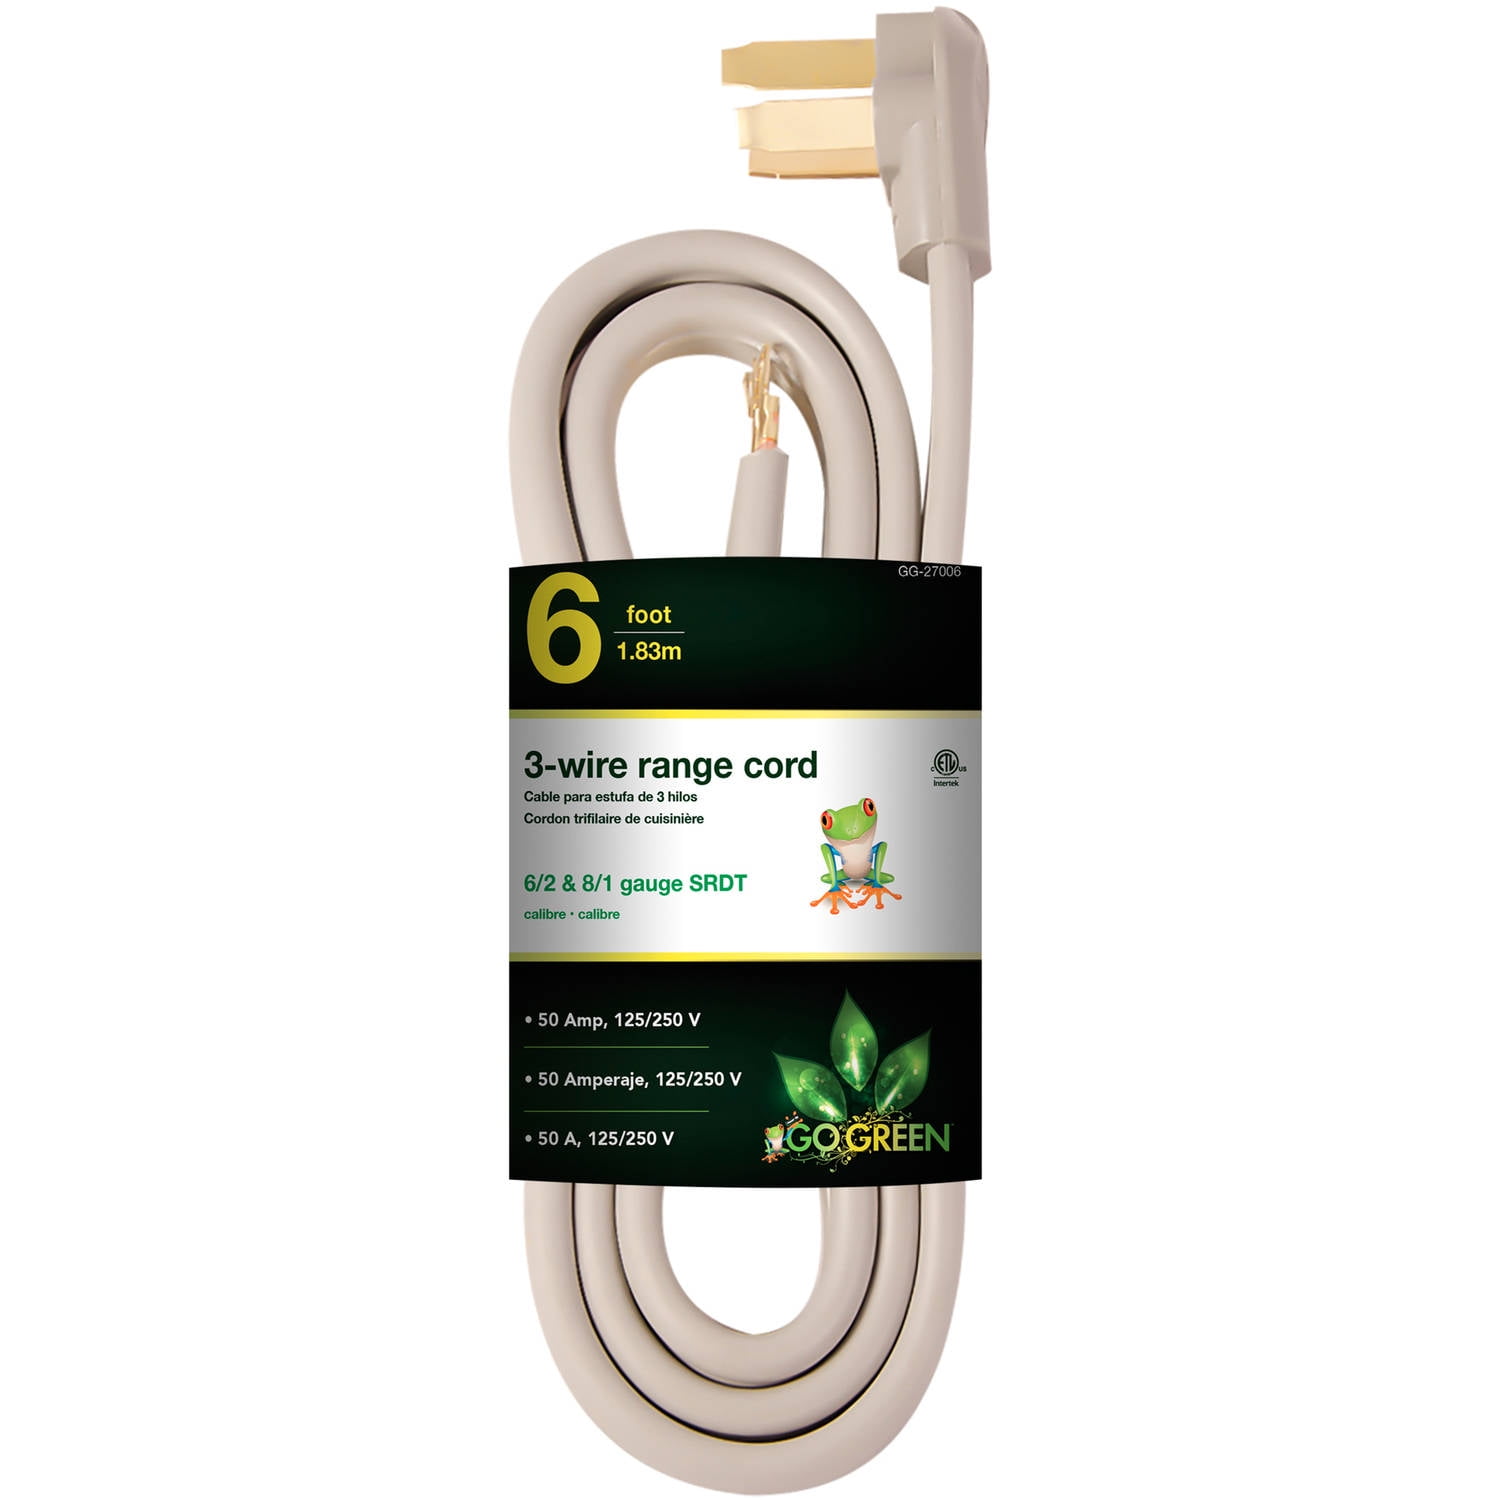 GoGreen Power 6 ft. 6/2 and 8/1 3-Wire Range Cord GG-27006 - The